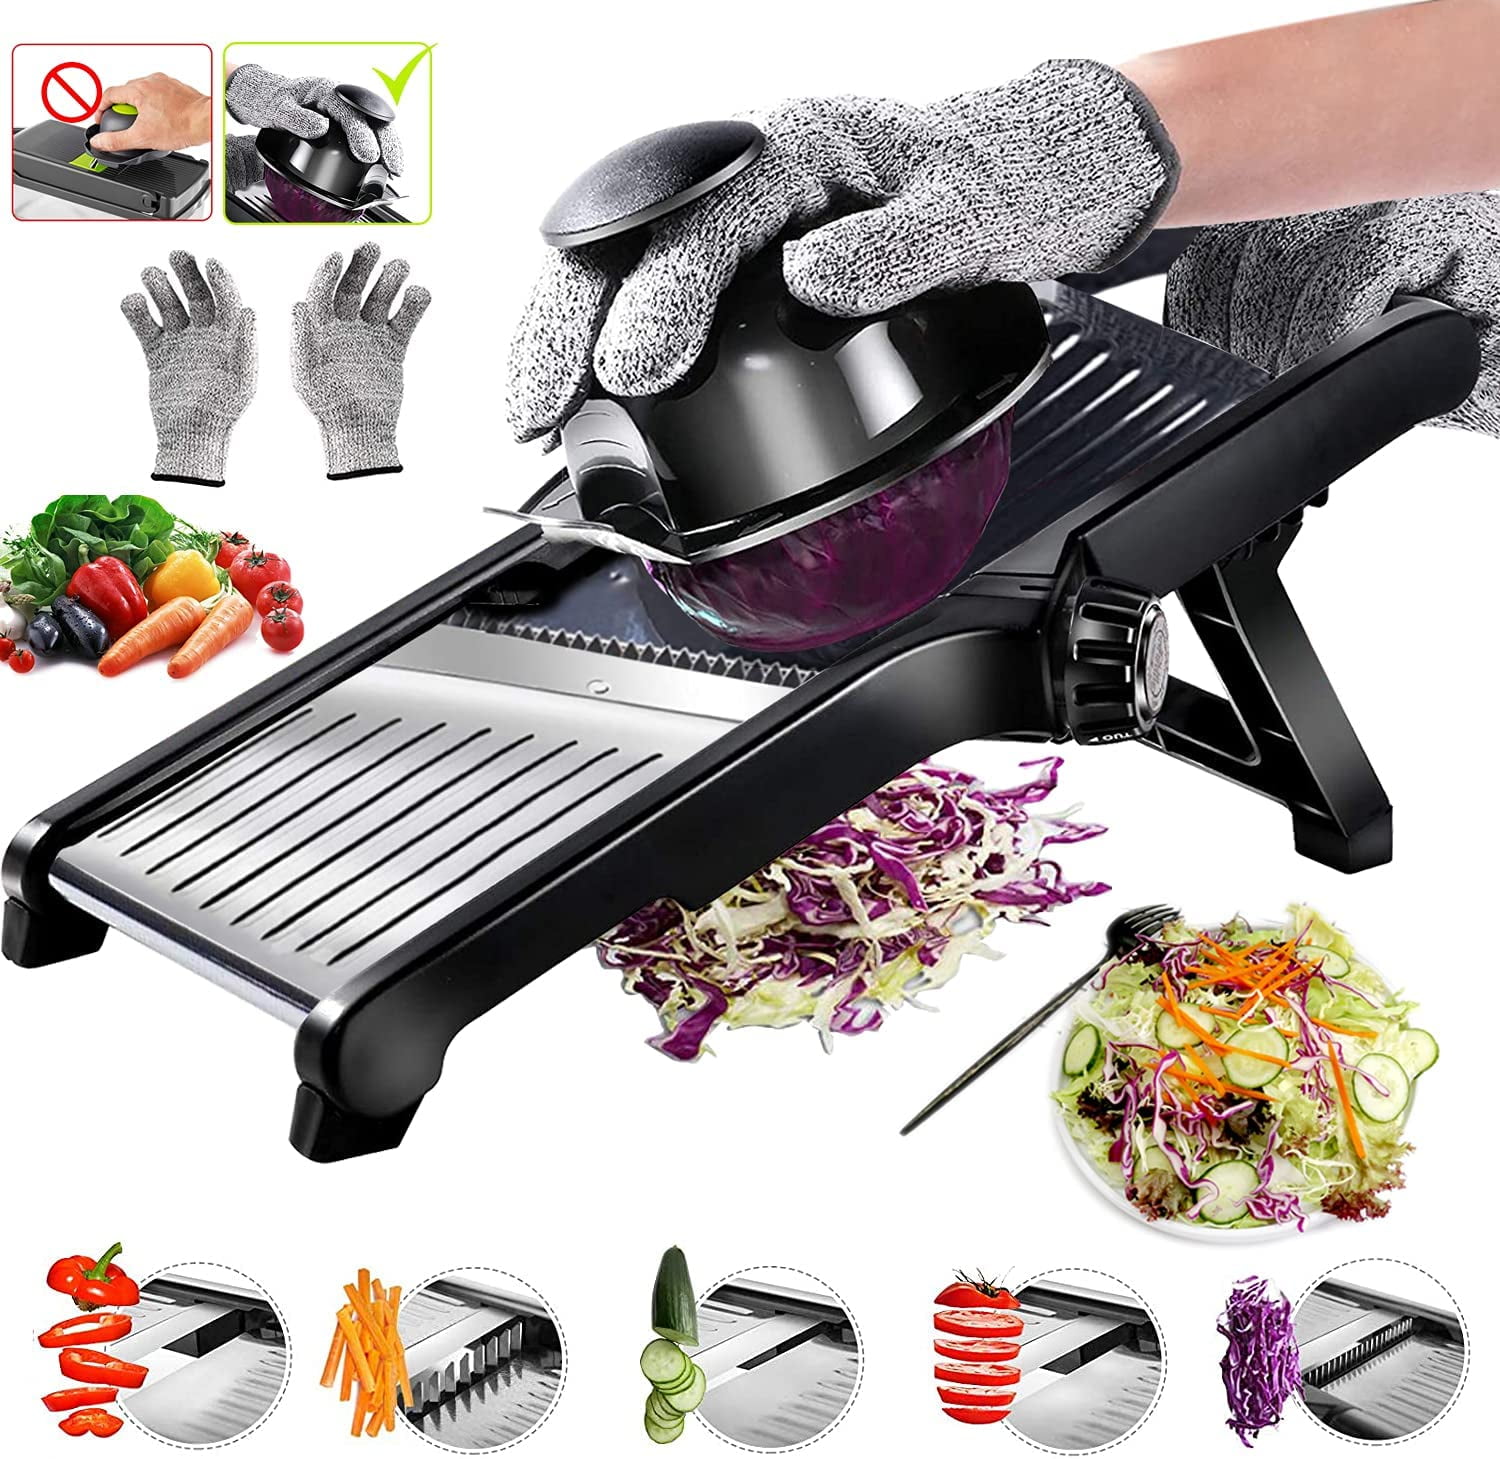 ] Gramercy Kitchen Company Adjustable Mandoline Food Slicer, Mandoline  Slicer for Kitchen, Mandolin Slicer, Potato Slicer, Tomato Slicer, Carrot  Slicer, Onion Slicer - Stainless Steel - INCLUDING One Pair Cut-Resistant  Gloves, with